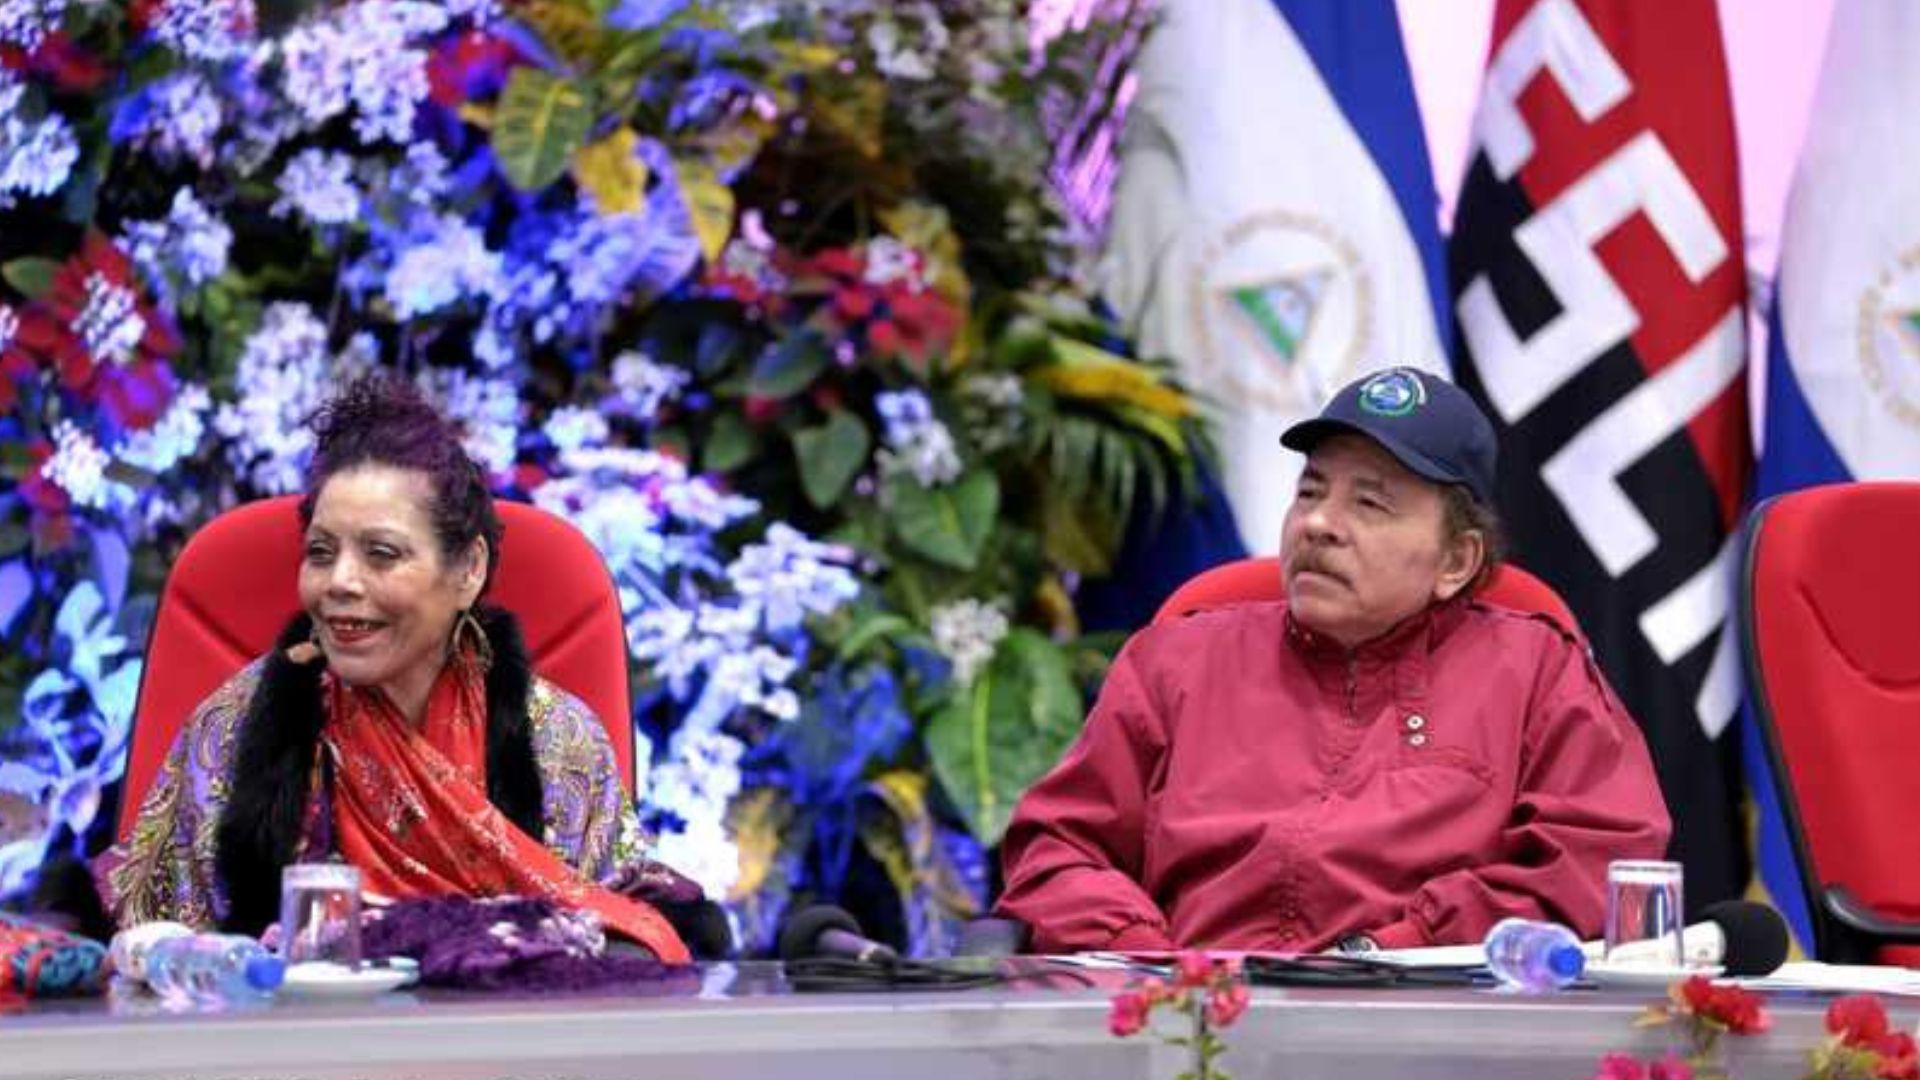 Ortega attacks the Church: "The cassock does not make anyone a saint, they are whitewashed tombs"